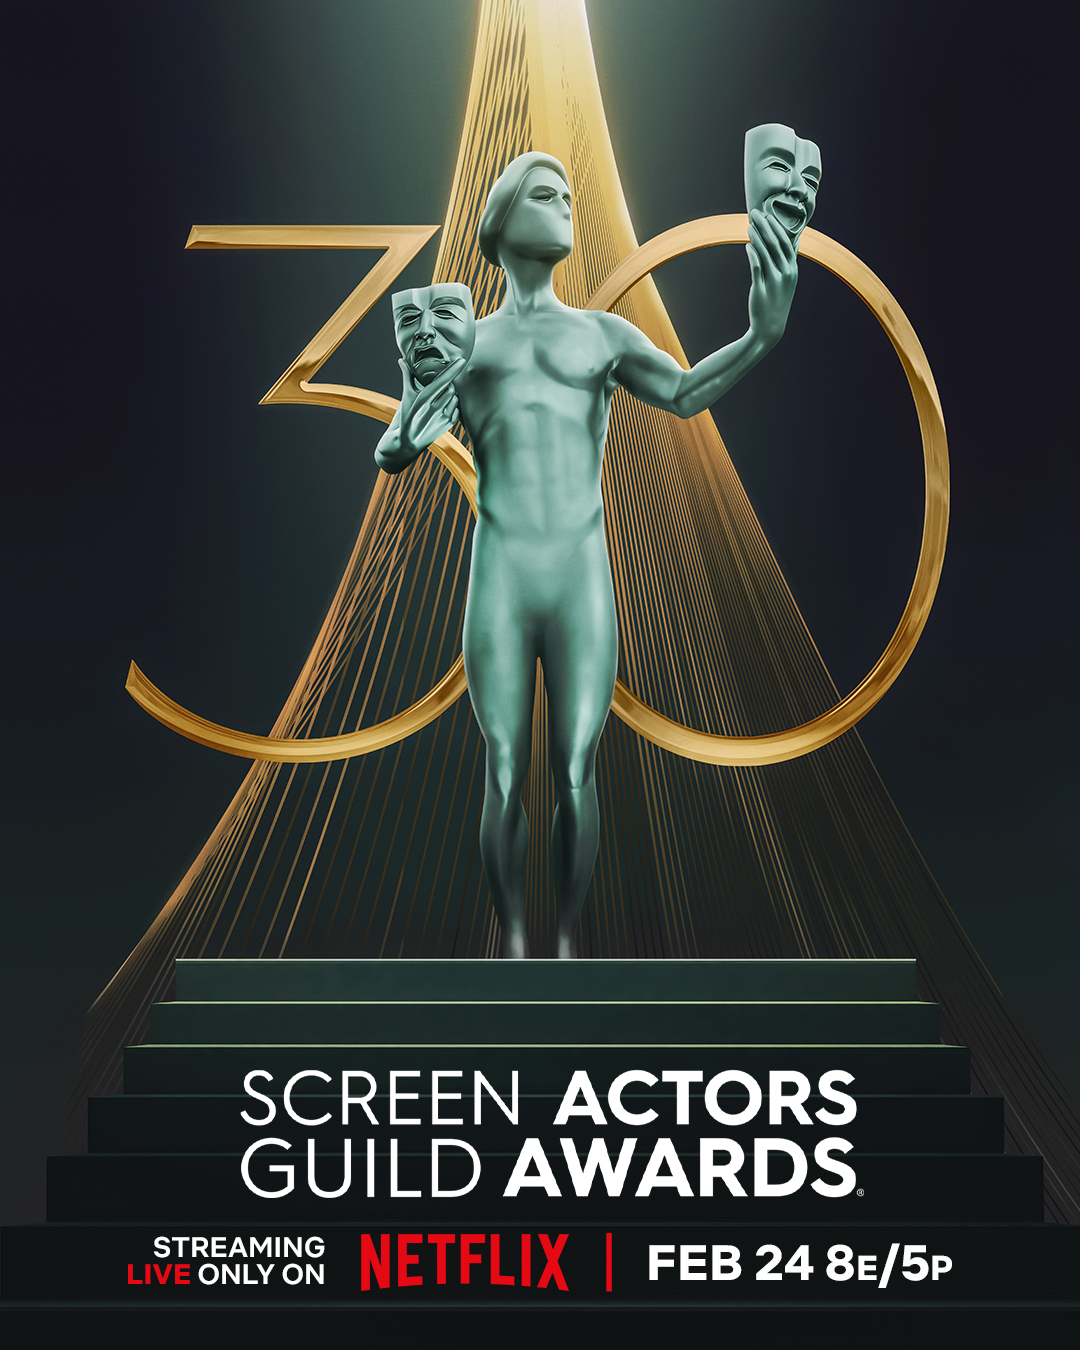 30th Annual Screen Actors Guild Awards Poster - The Actor statue is spotlit with 3 and 0 on either side.